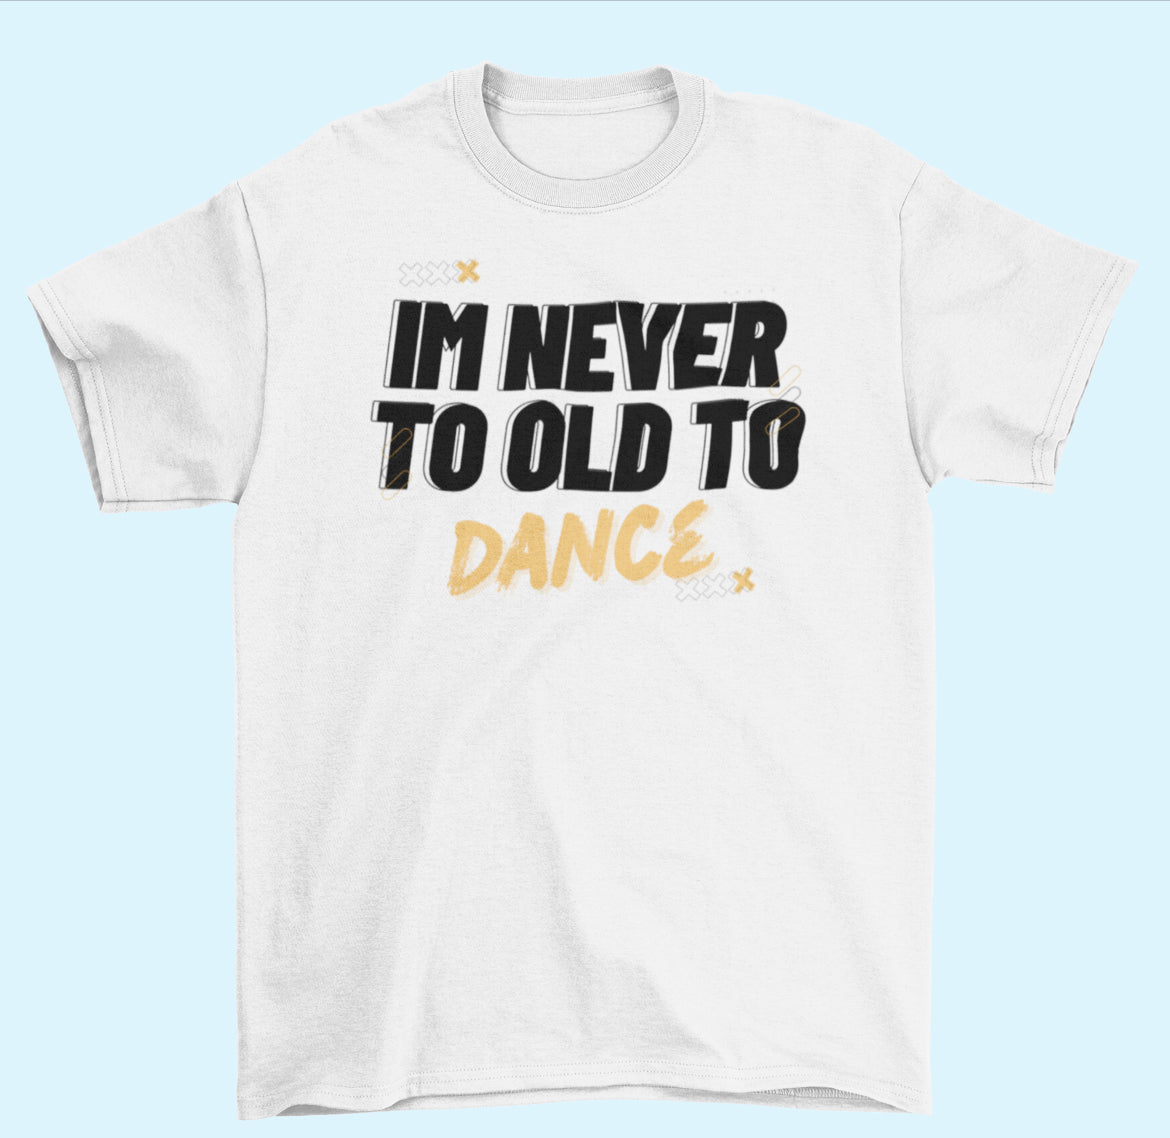 “I’m never to old to DANCE “ t -shirt